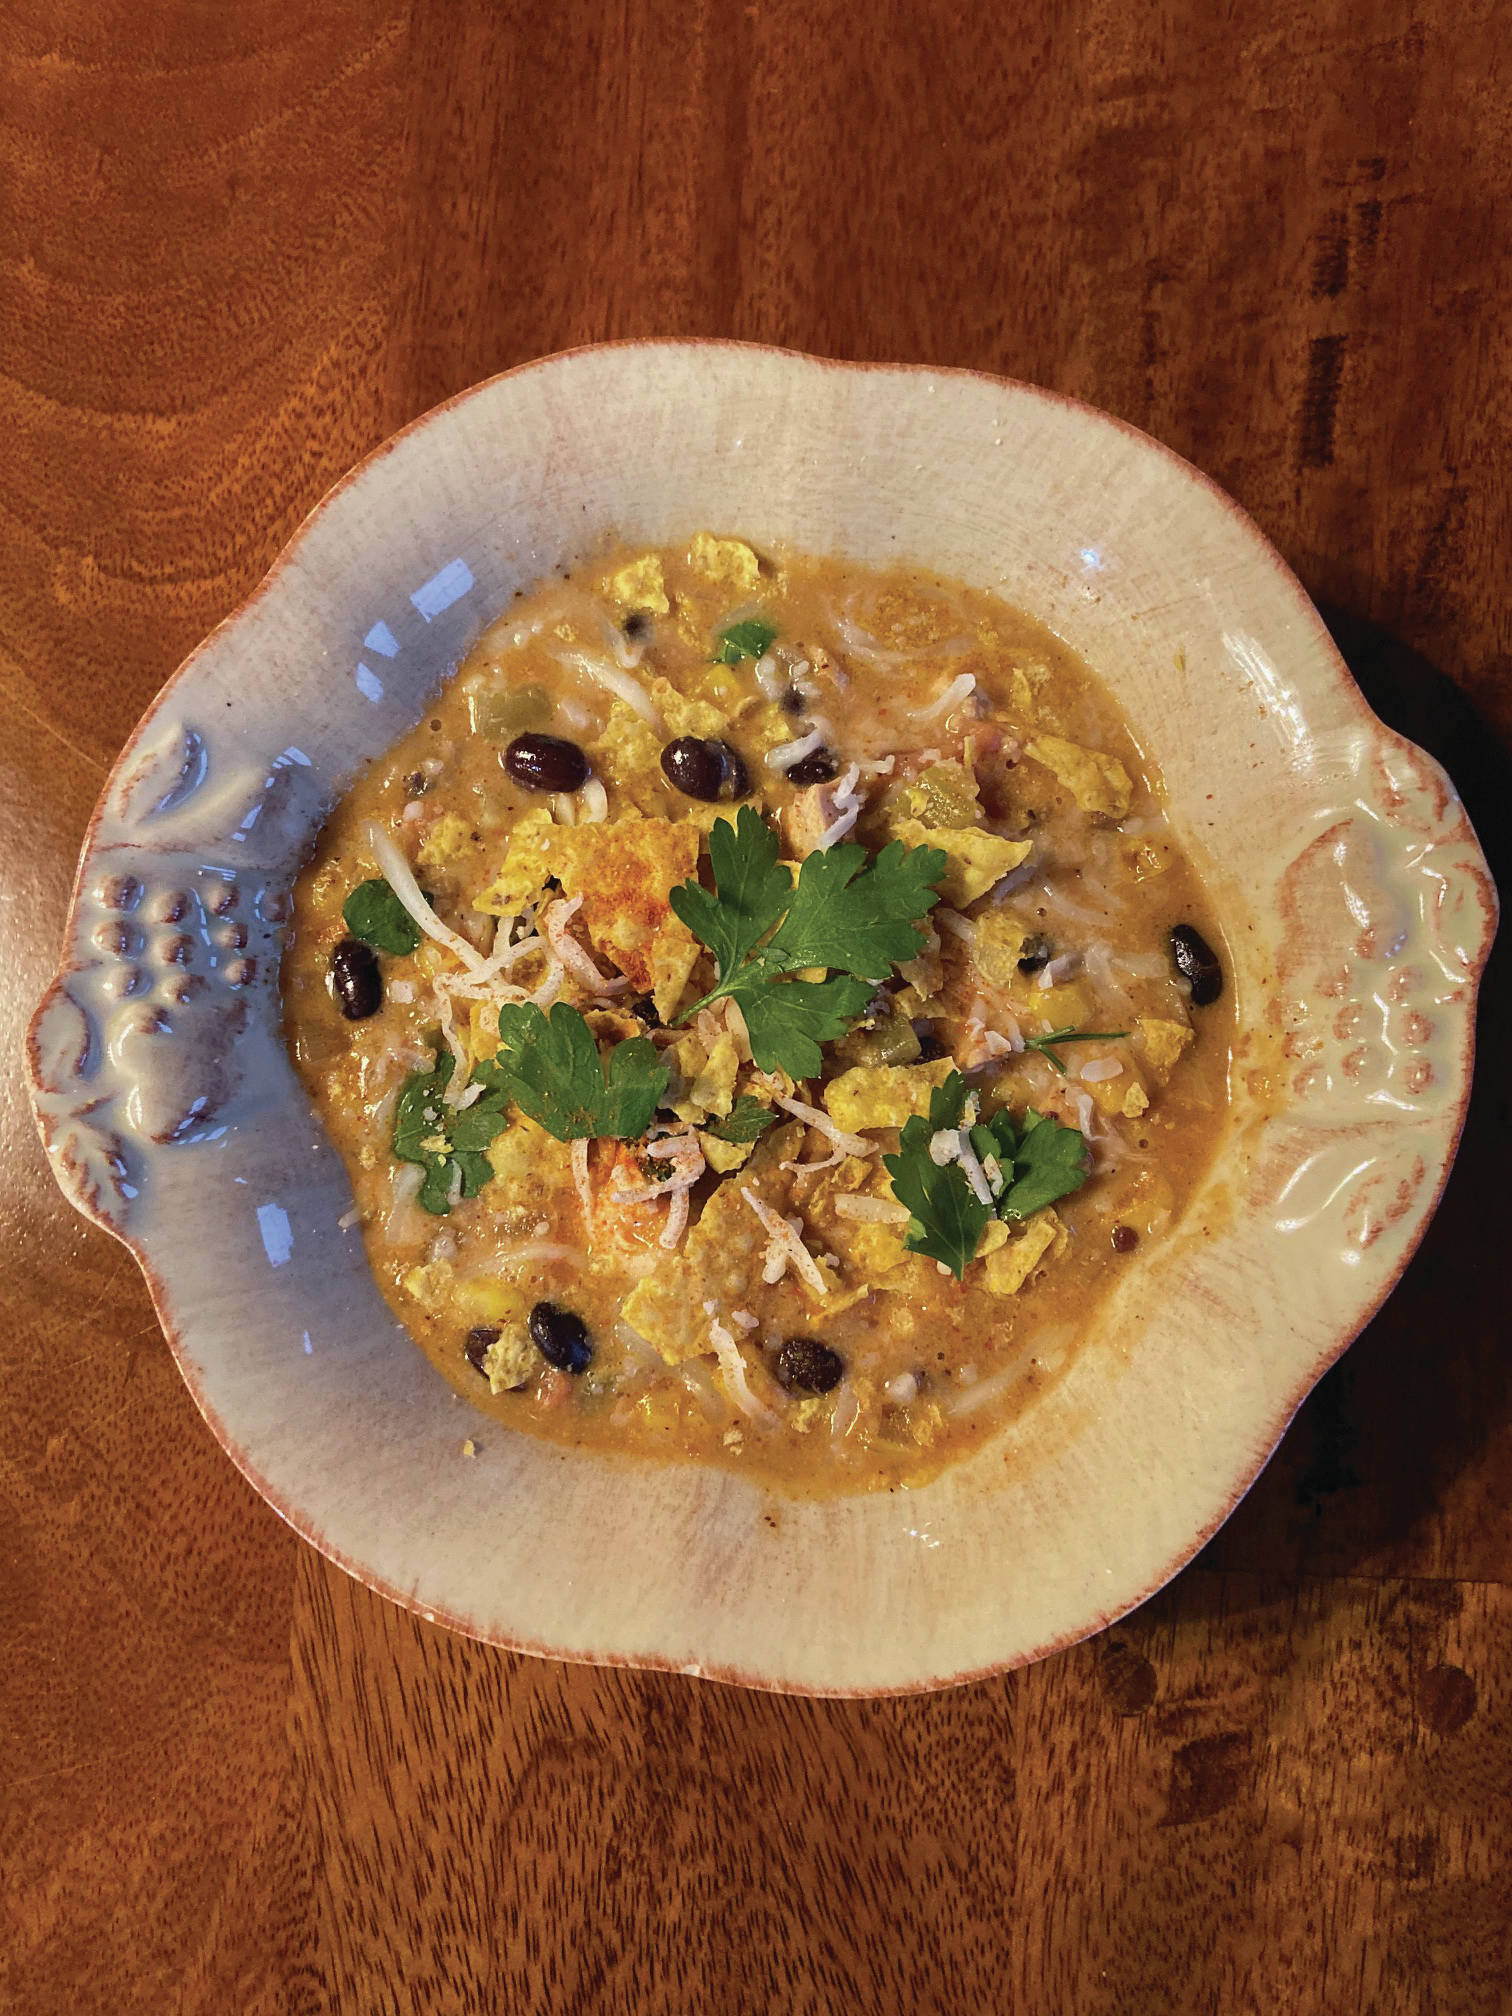 Use up leftover turkey in this roasted corn and chili soup, as seen here on Nov. 26, 2019, in Teri Robl’s Homer, Alaska, kitchen. (Photo by Teri Robl)